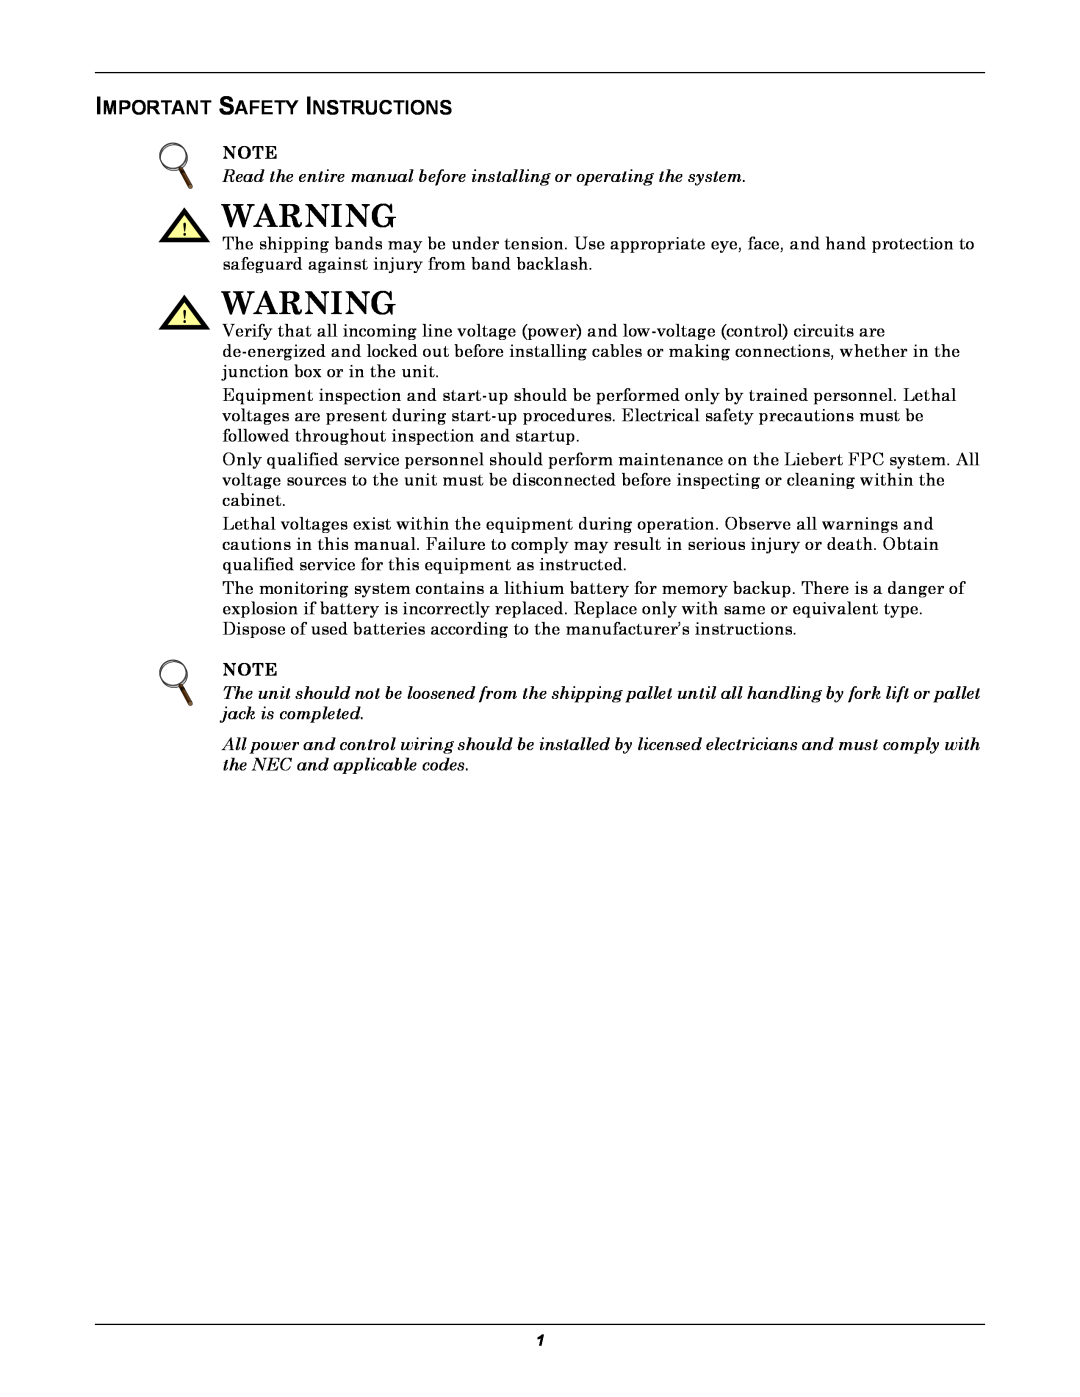 Emerson FPC user manual Important Safety Instructions, Read the entire manual before installing or operating the system 